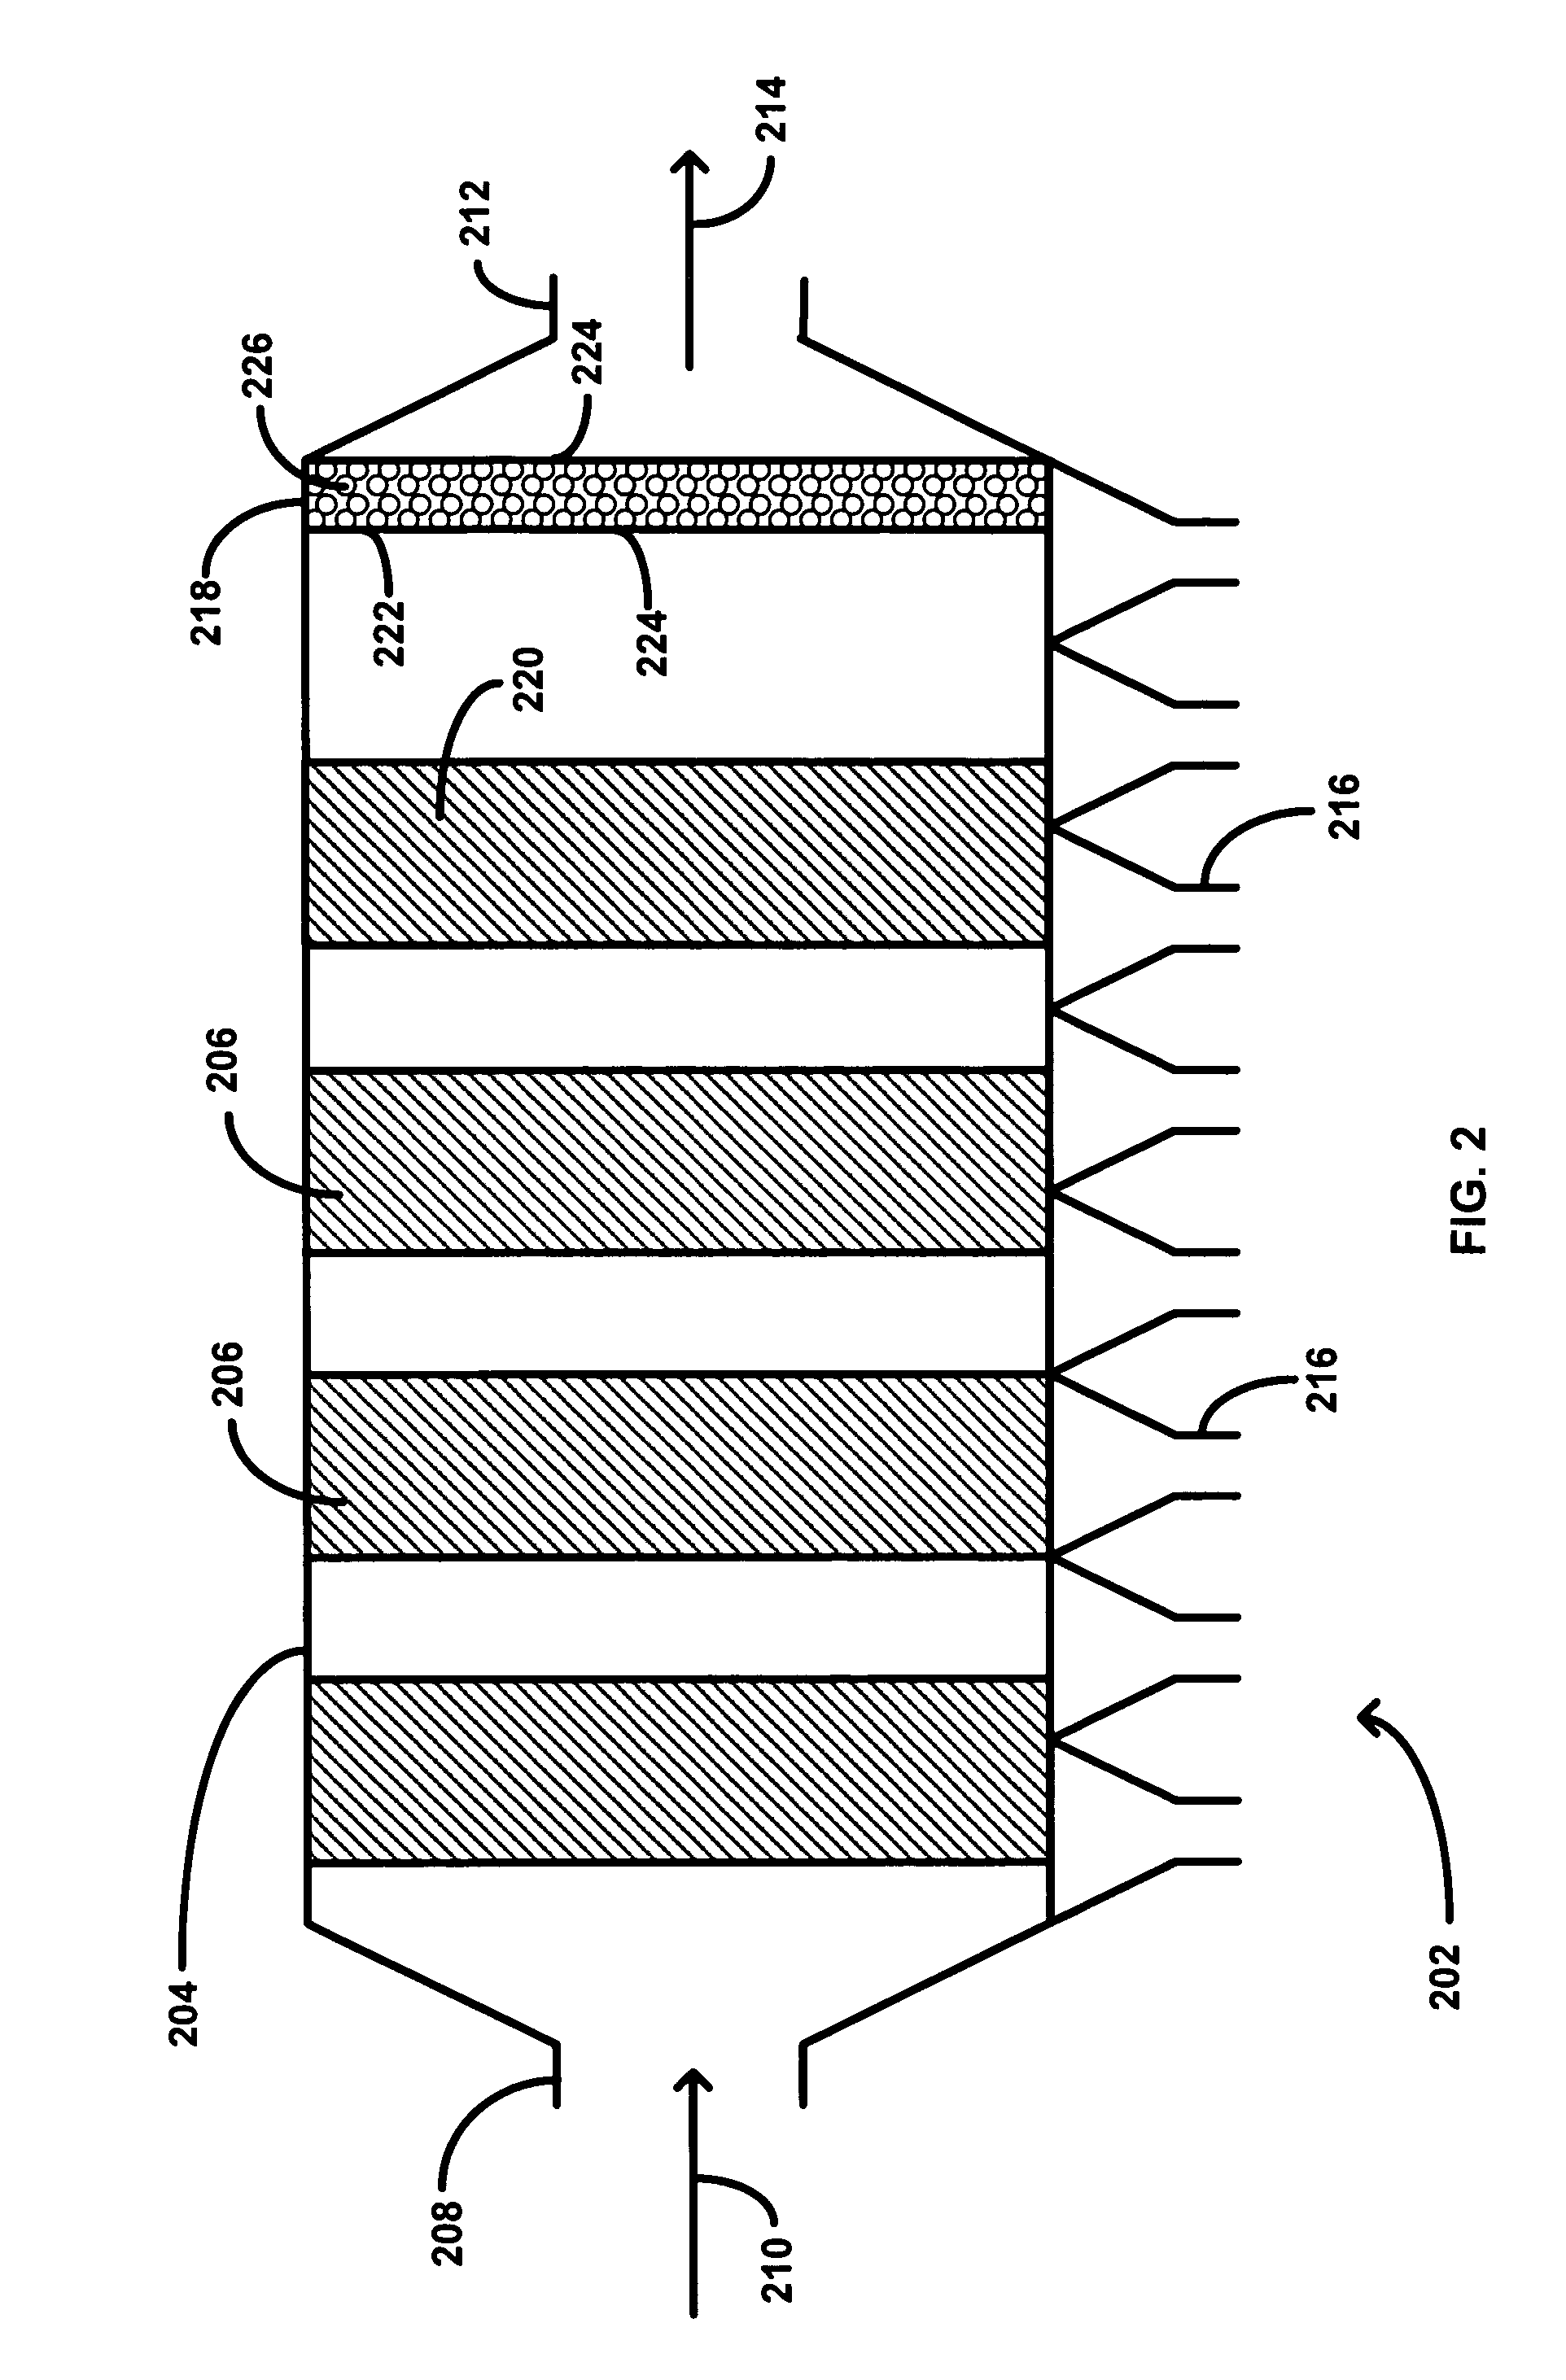 Sorbent filter for the removal of vapor phase contaminants